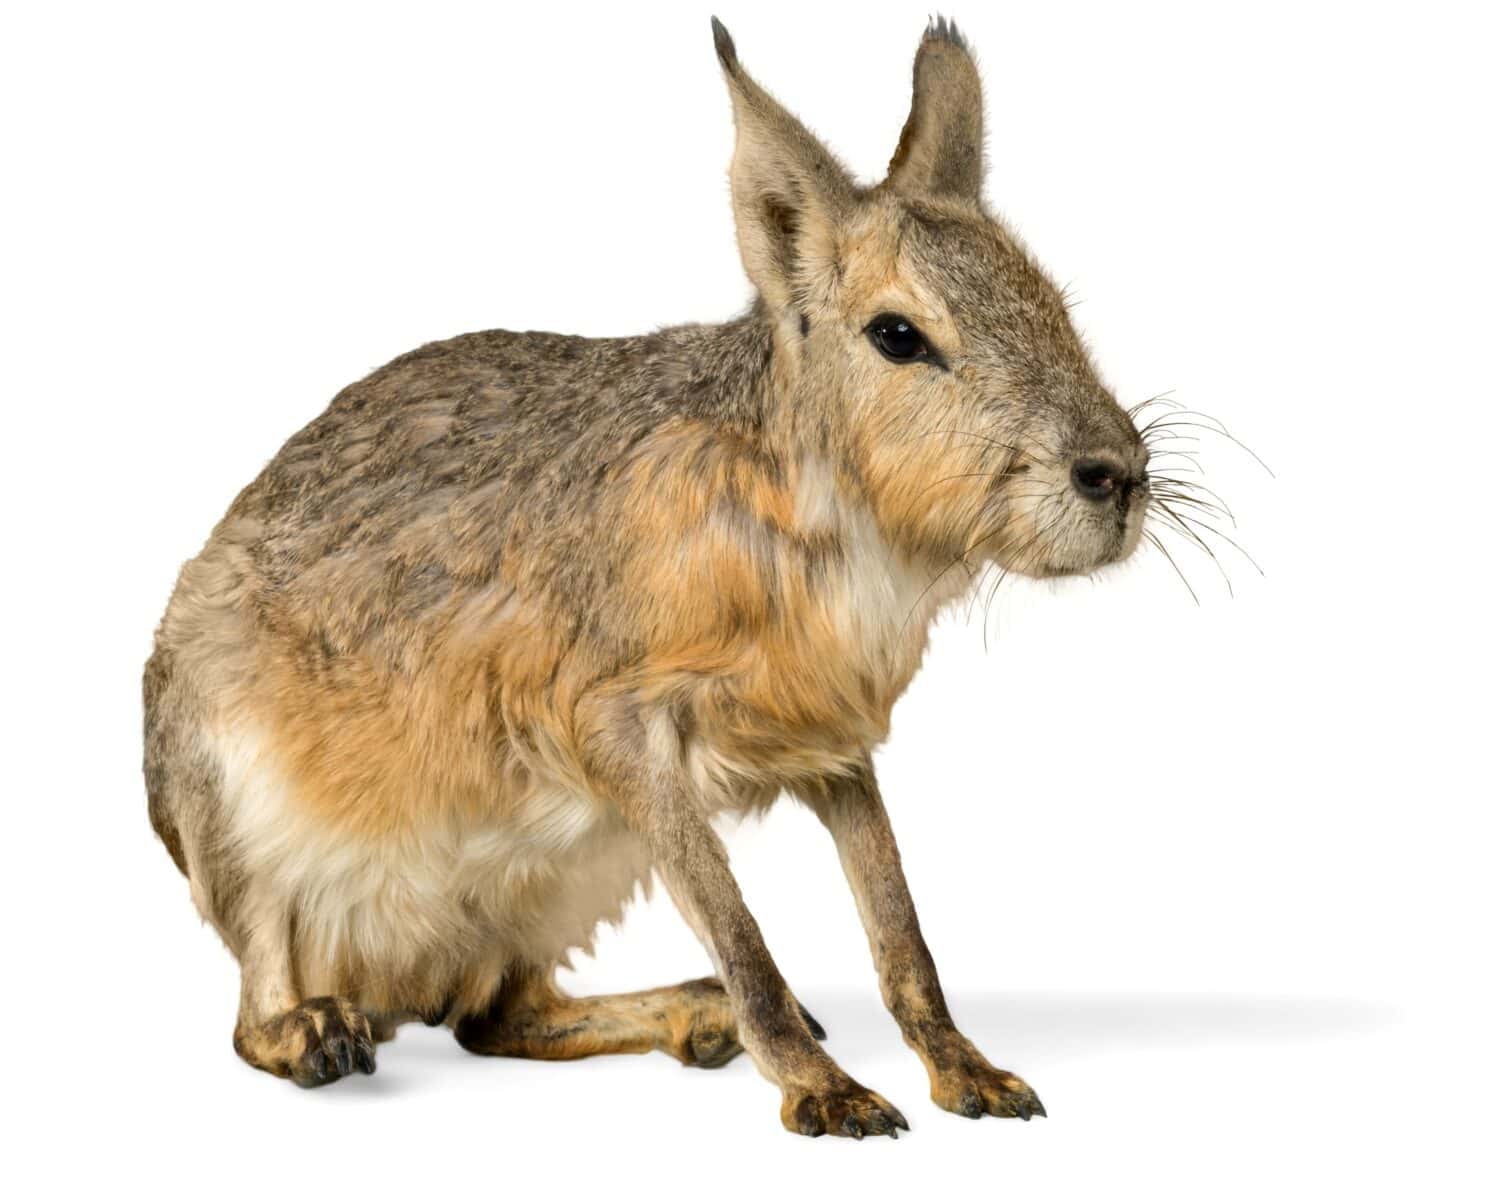 Patagonian cavy image